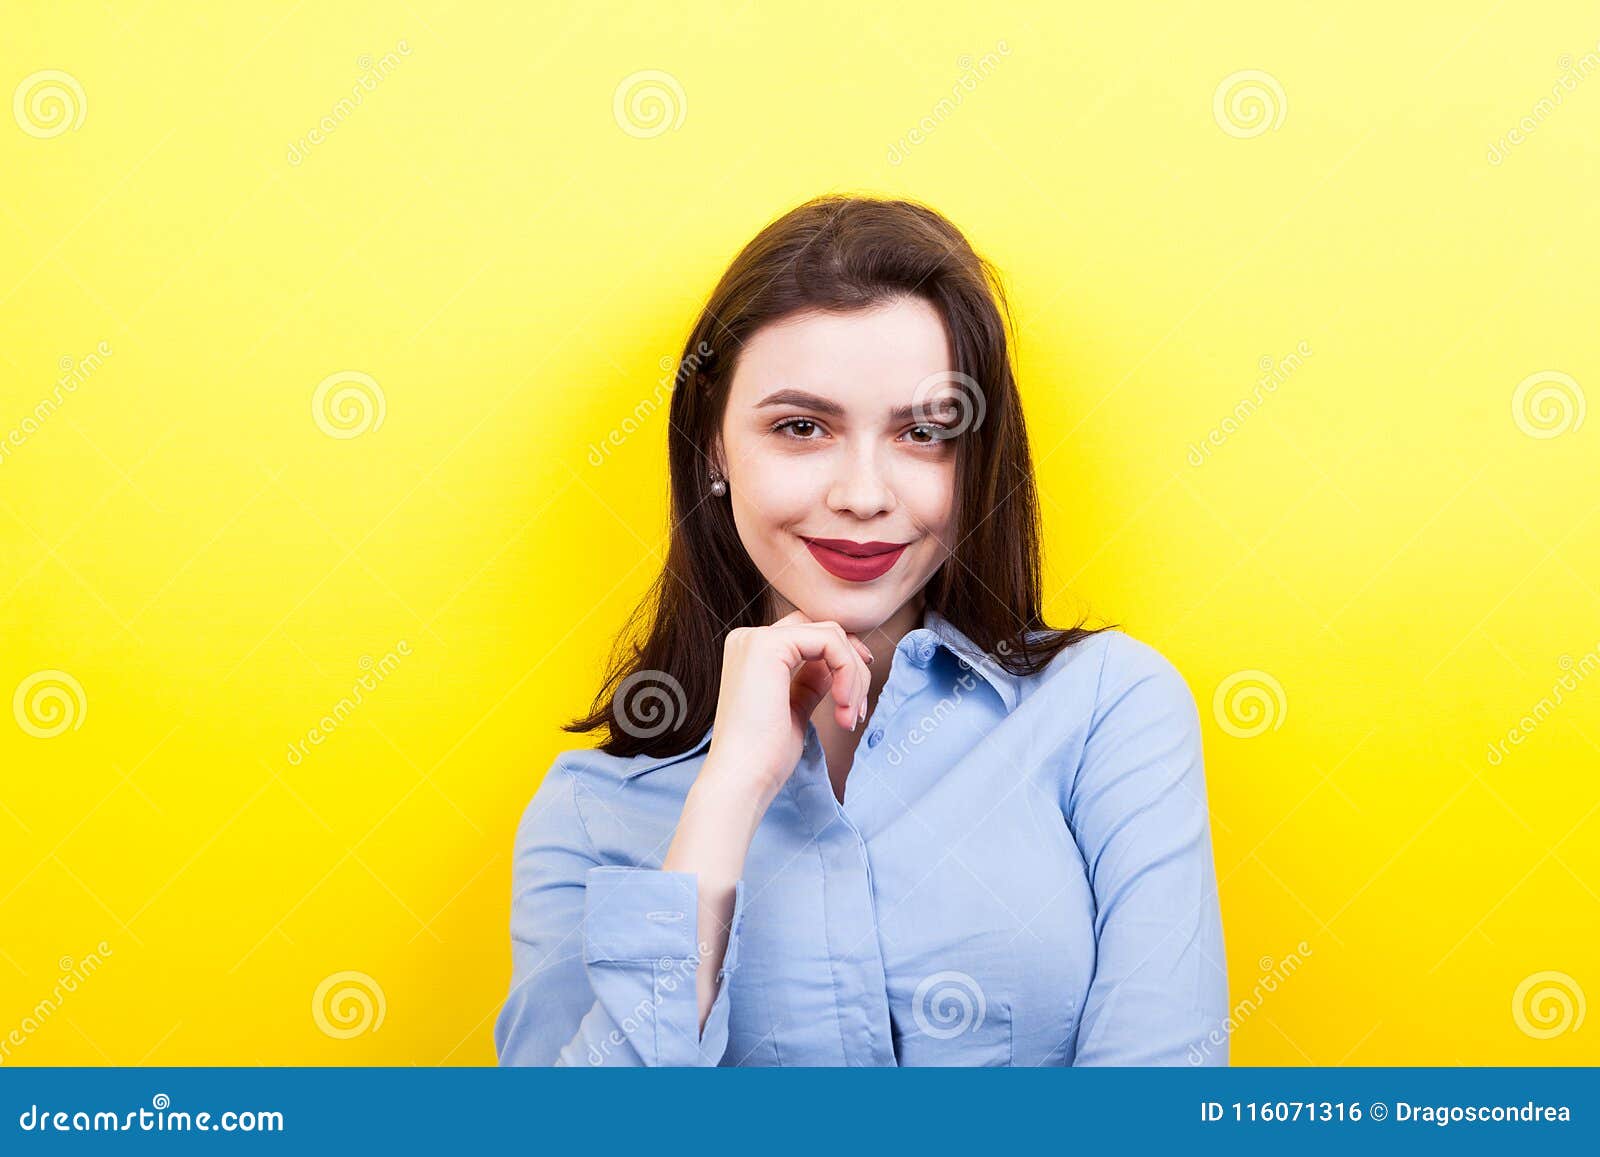 Happy Woman Wearing a Blue Business Shirt Stock Photo - Image of ...